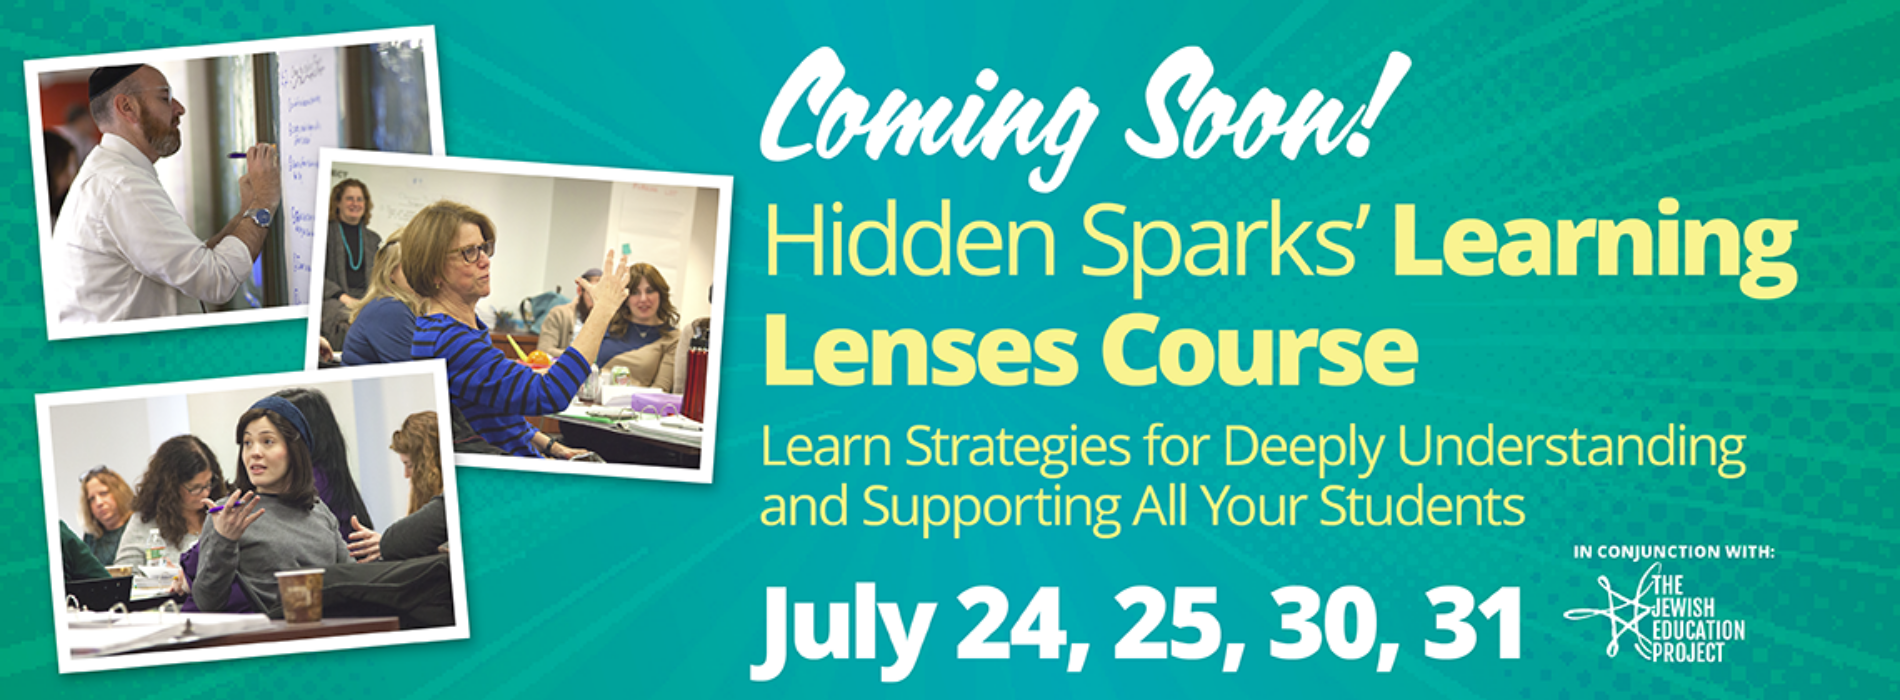 Coming Soon! Hidden Sparks' Learning Lenses Course